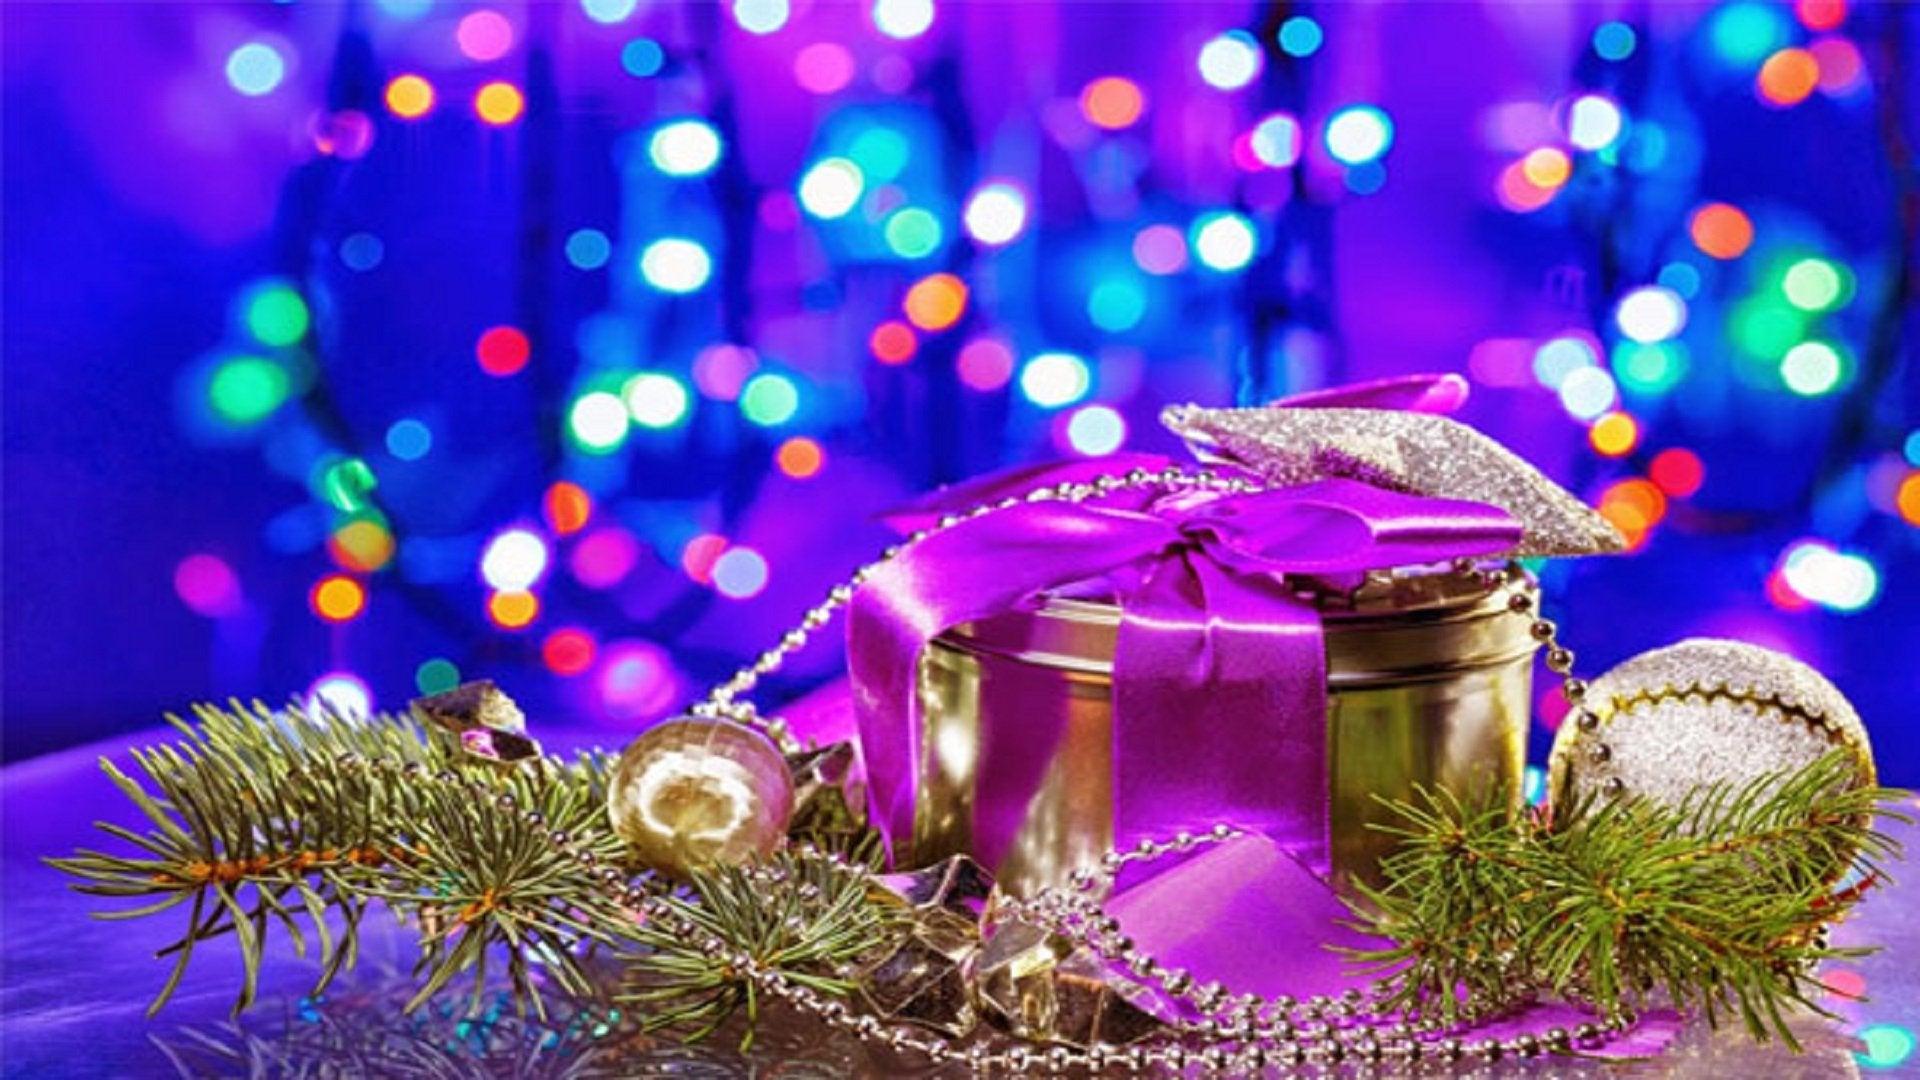 Top 10 Merry Christmas Free Hd Wallpaper For 1920x1080